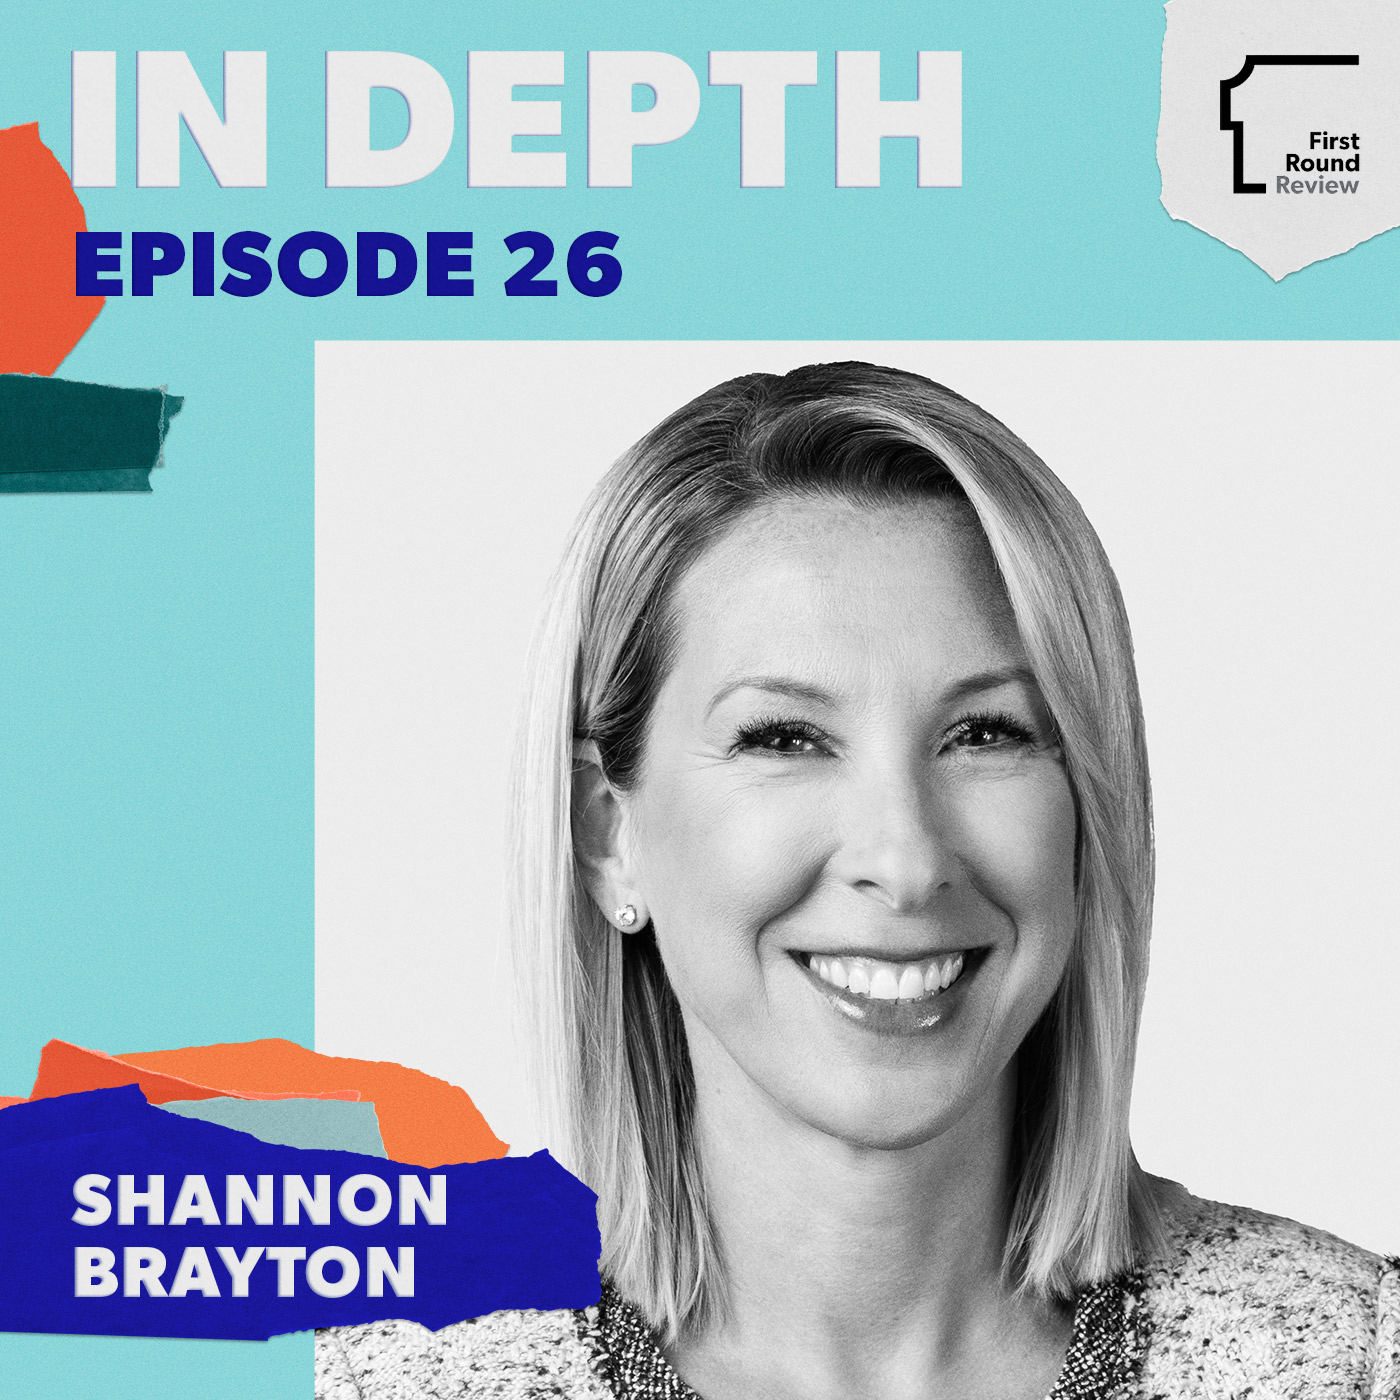 Killing stories and creating categories — Comms tips from Shannon Brayton’s 25+ years in tech